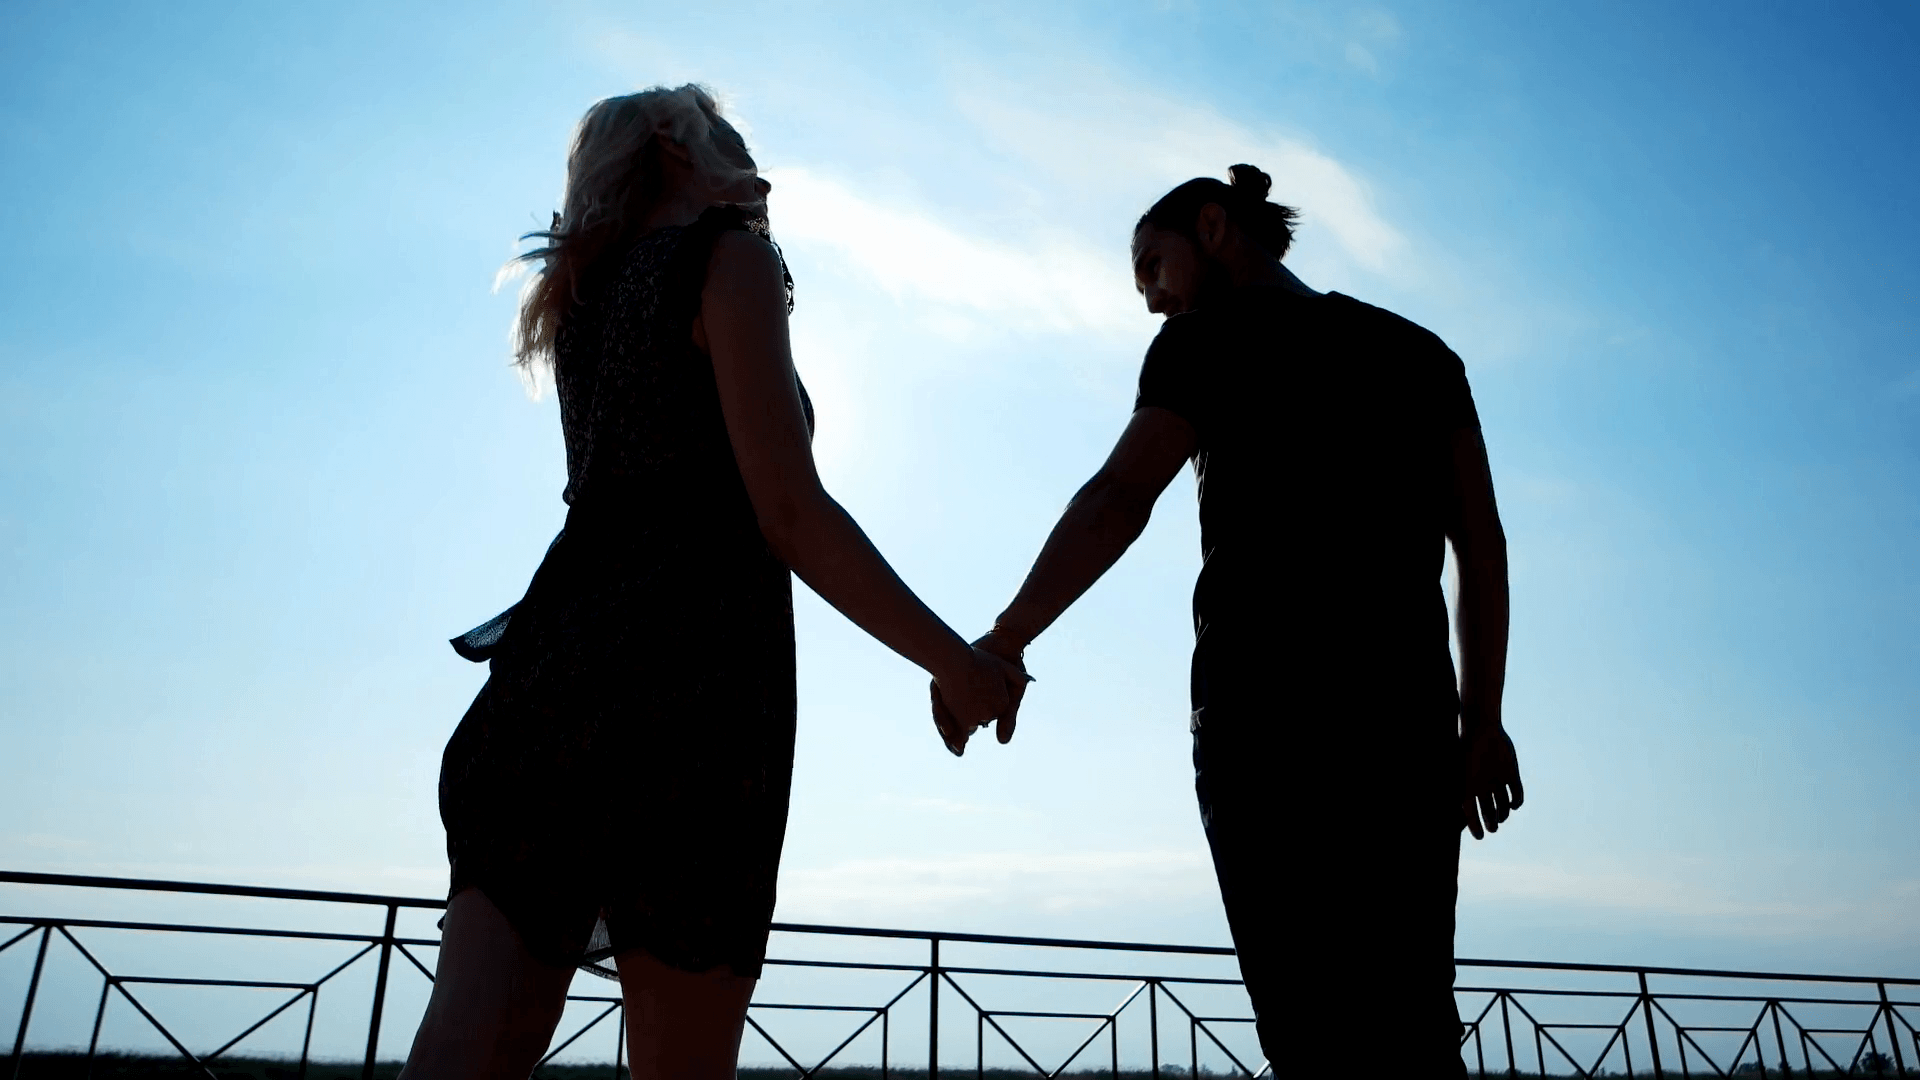 sweet couple walking in sunlight holding each other hand, wind